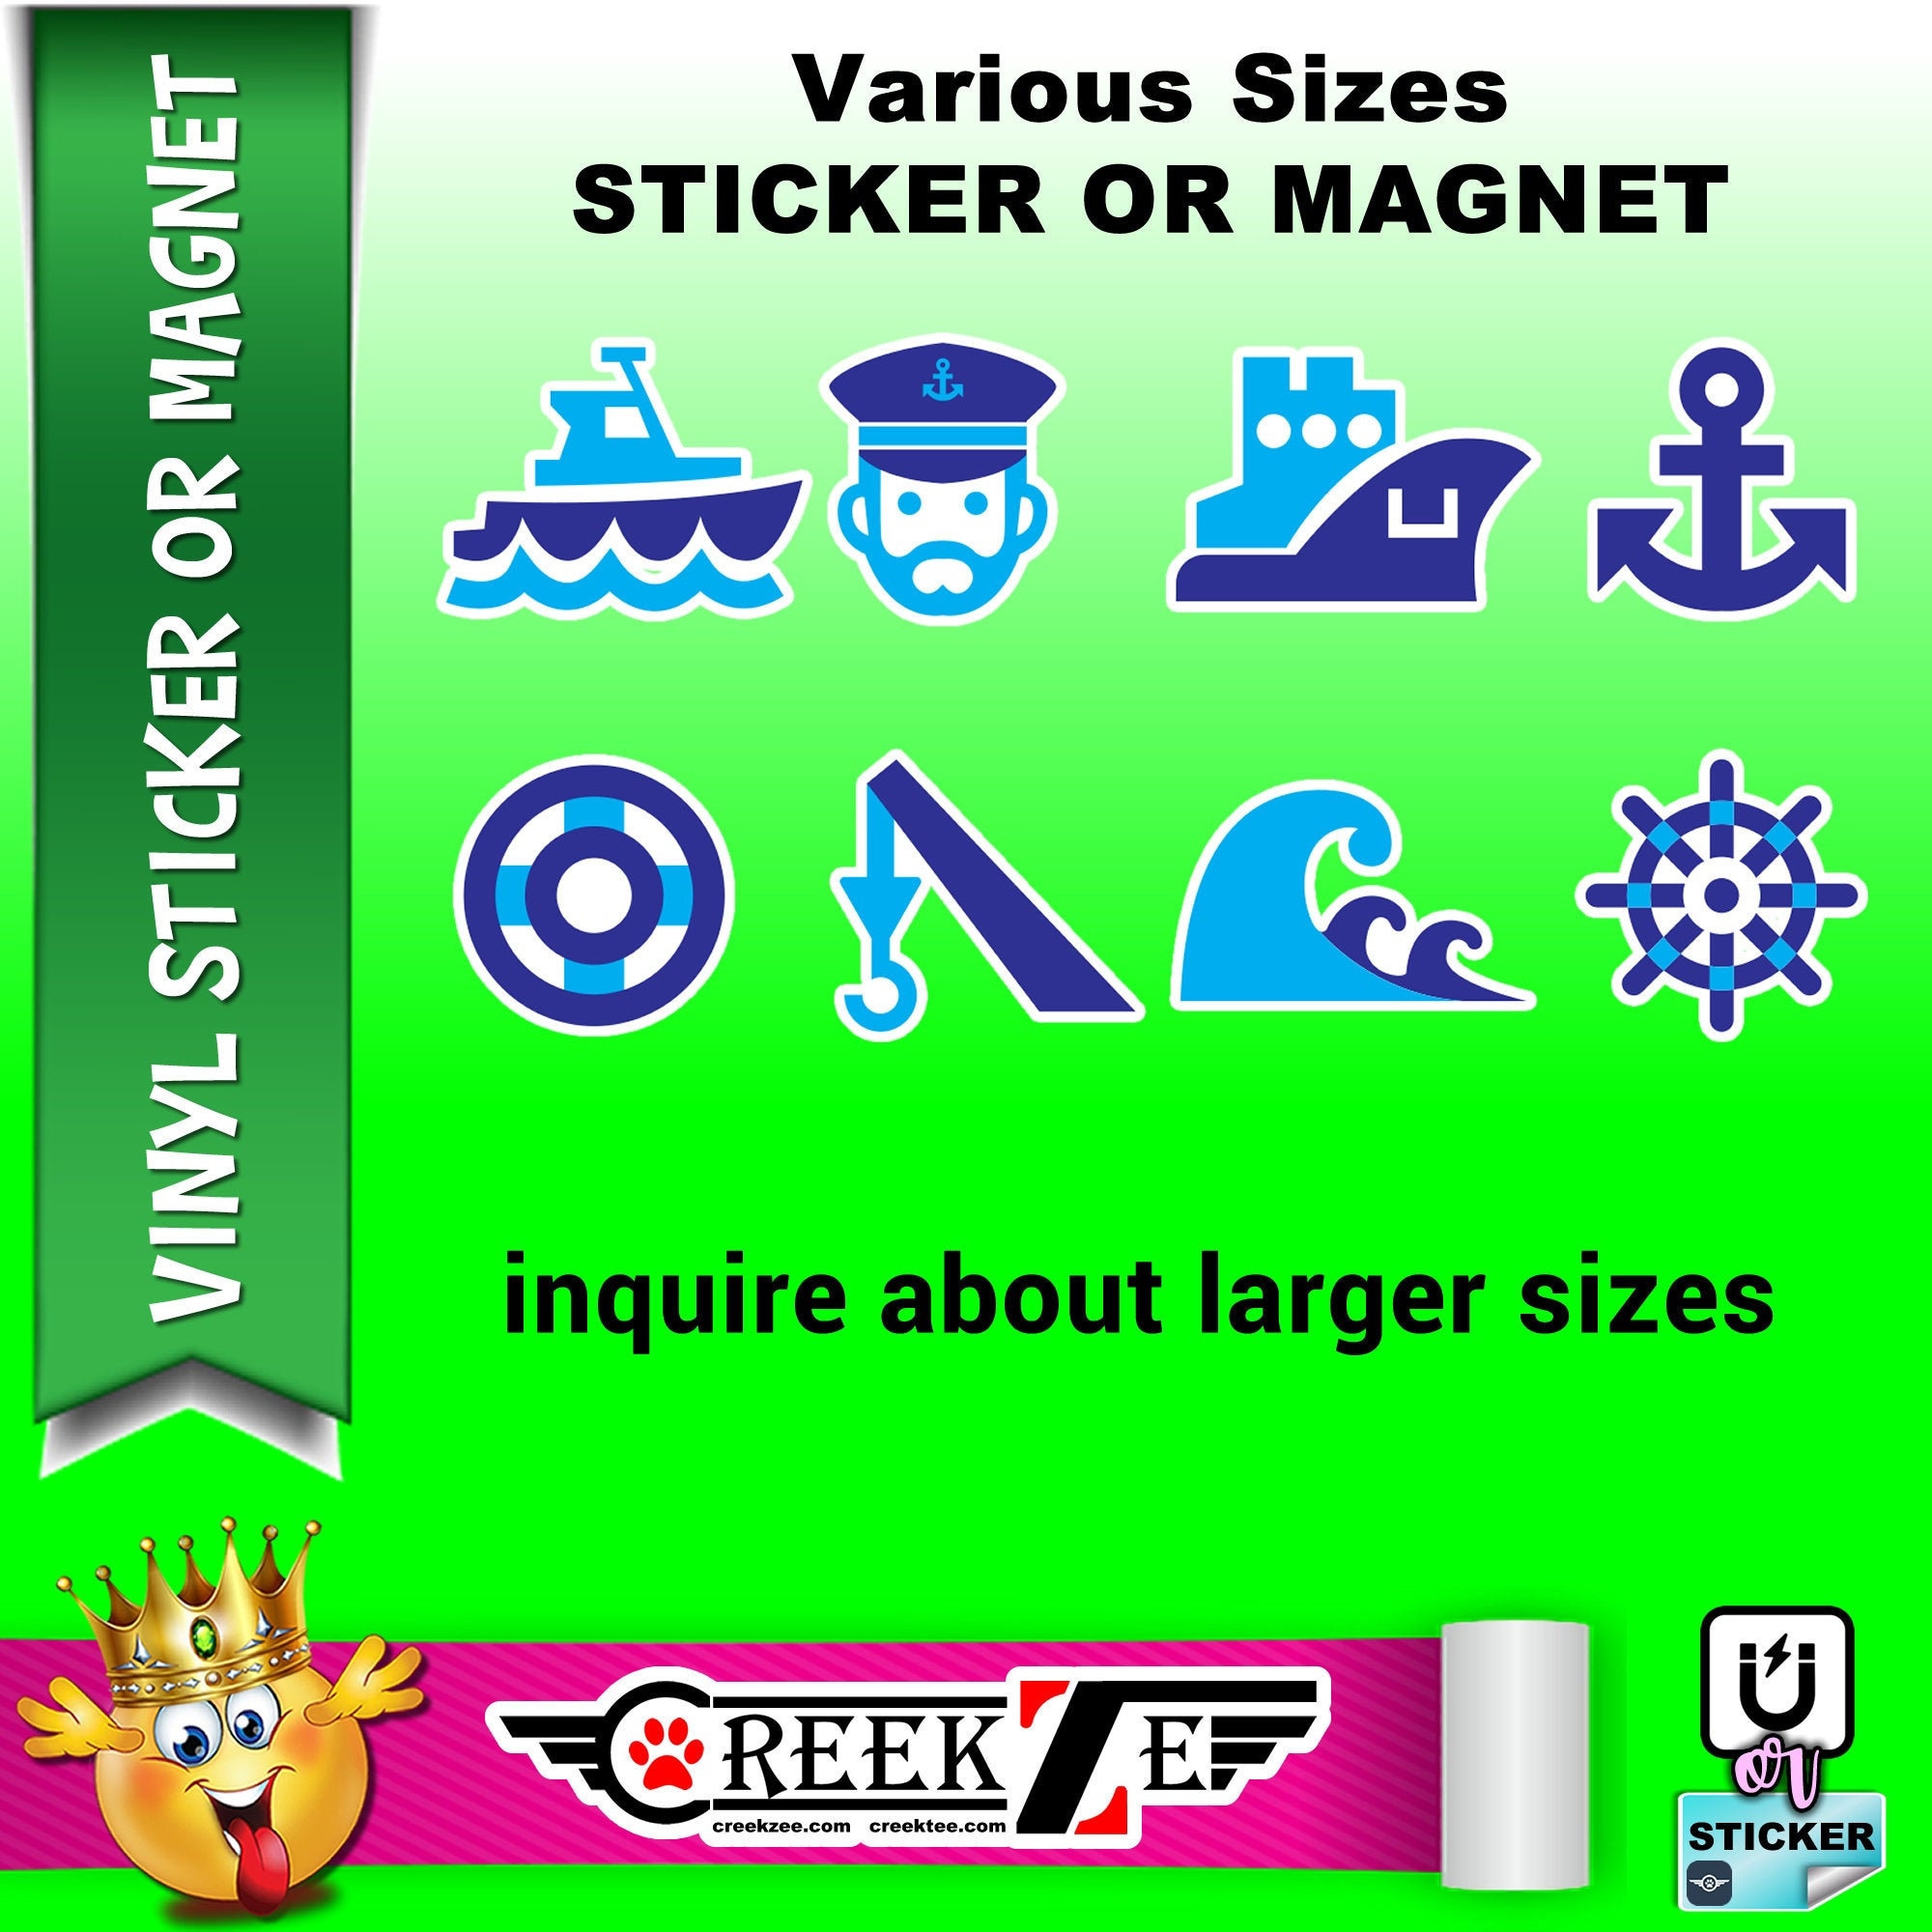 8 Boat Nautical stickers in standard, photo or vinyl print materials with laminate or magnet options available.  Premium.